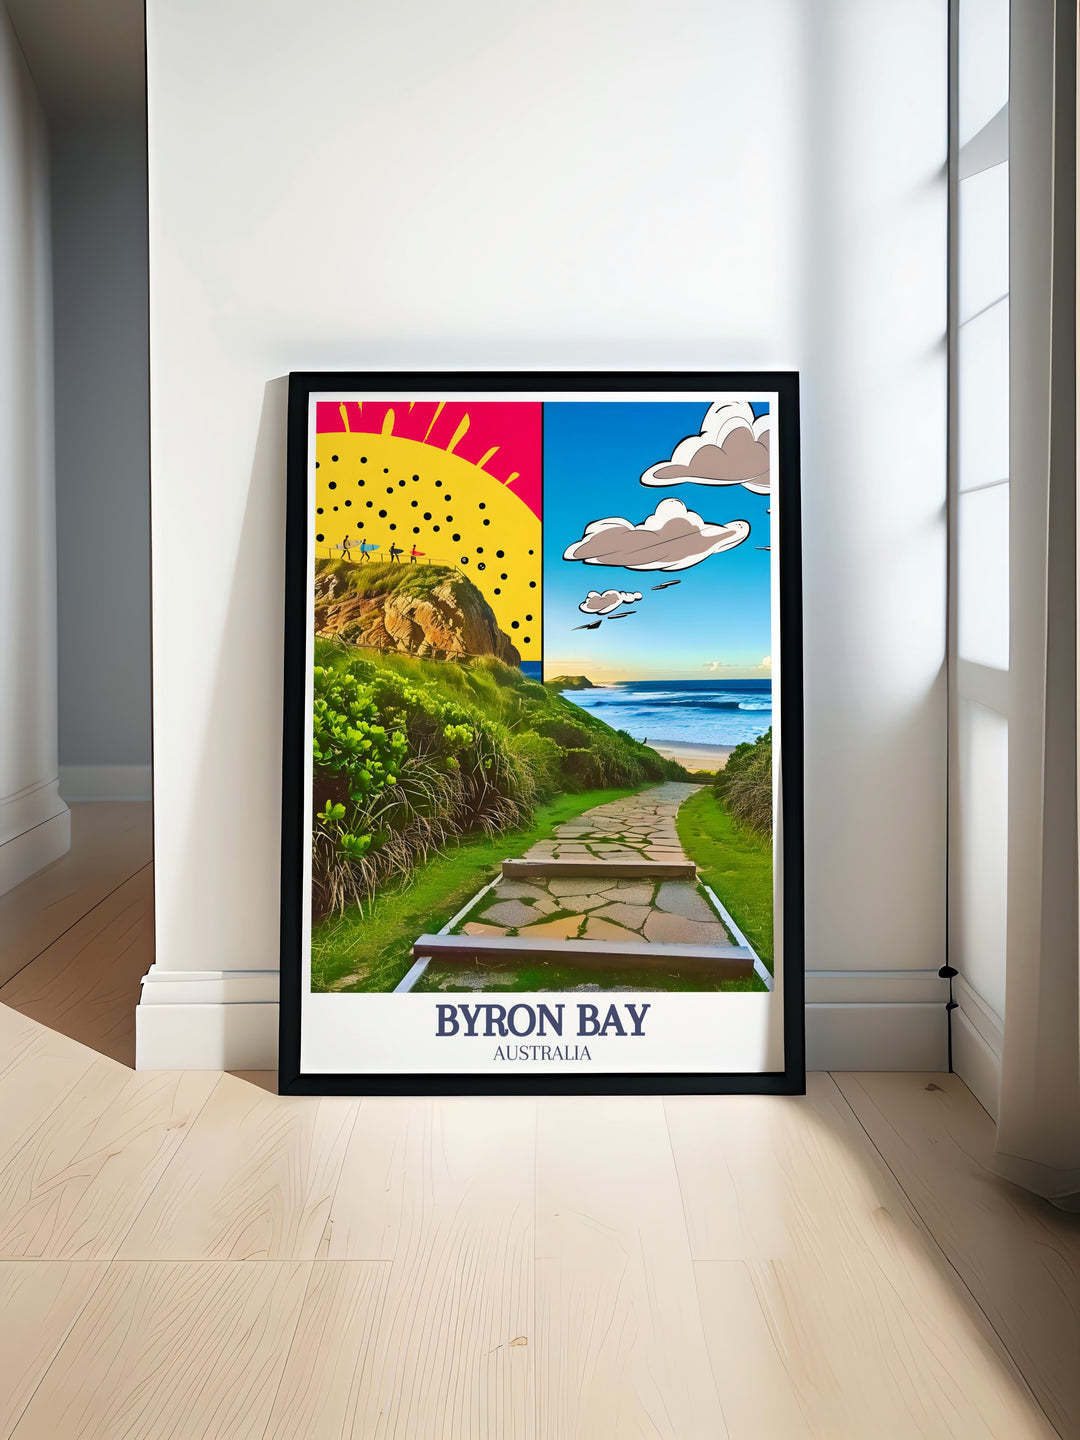 Byron Bay Print featuring Cape Byron Walking Track and Byron beach in vibrant colors perfect for enhancing home decor or as a thoughtful gift. Beautifully crafted wall art that captures the scenic beauty of Byron Bay and adds a splash of color to any room.